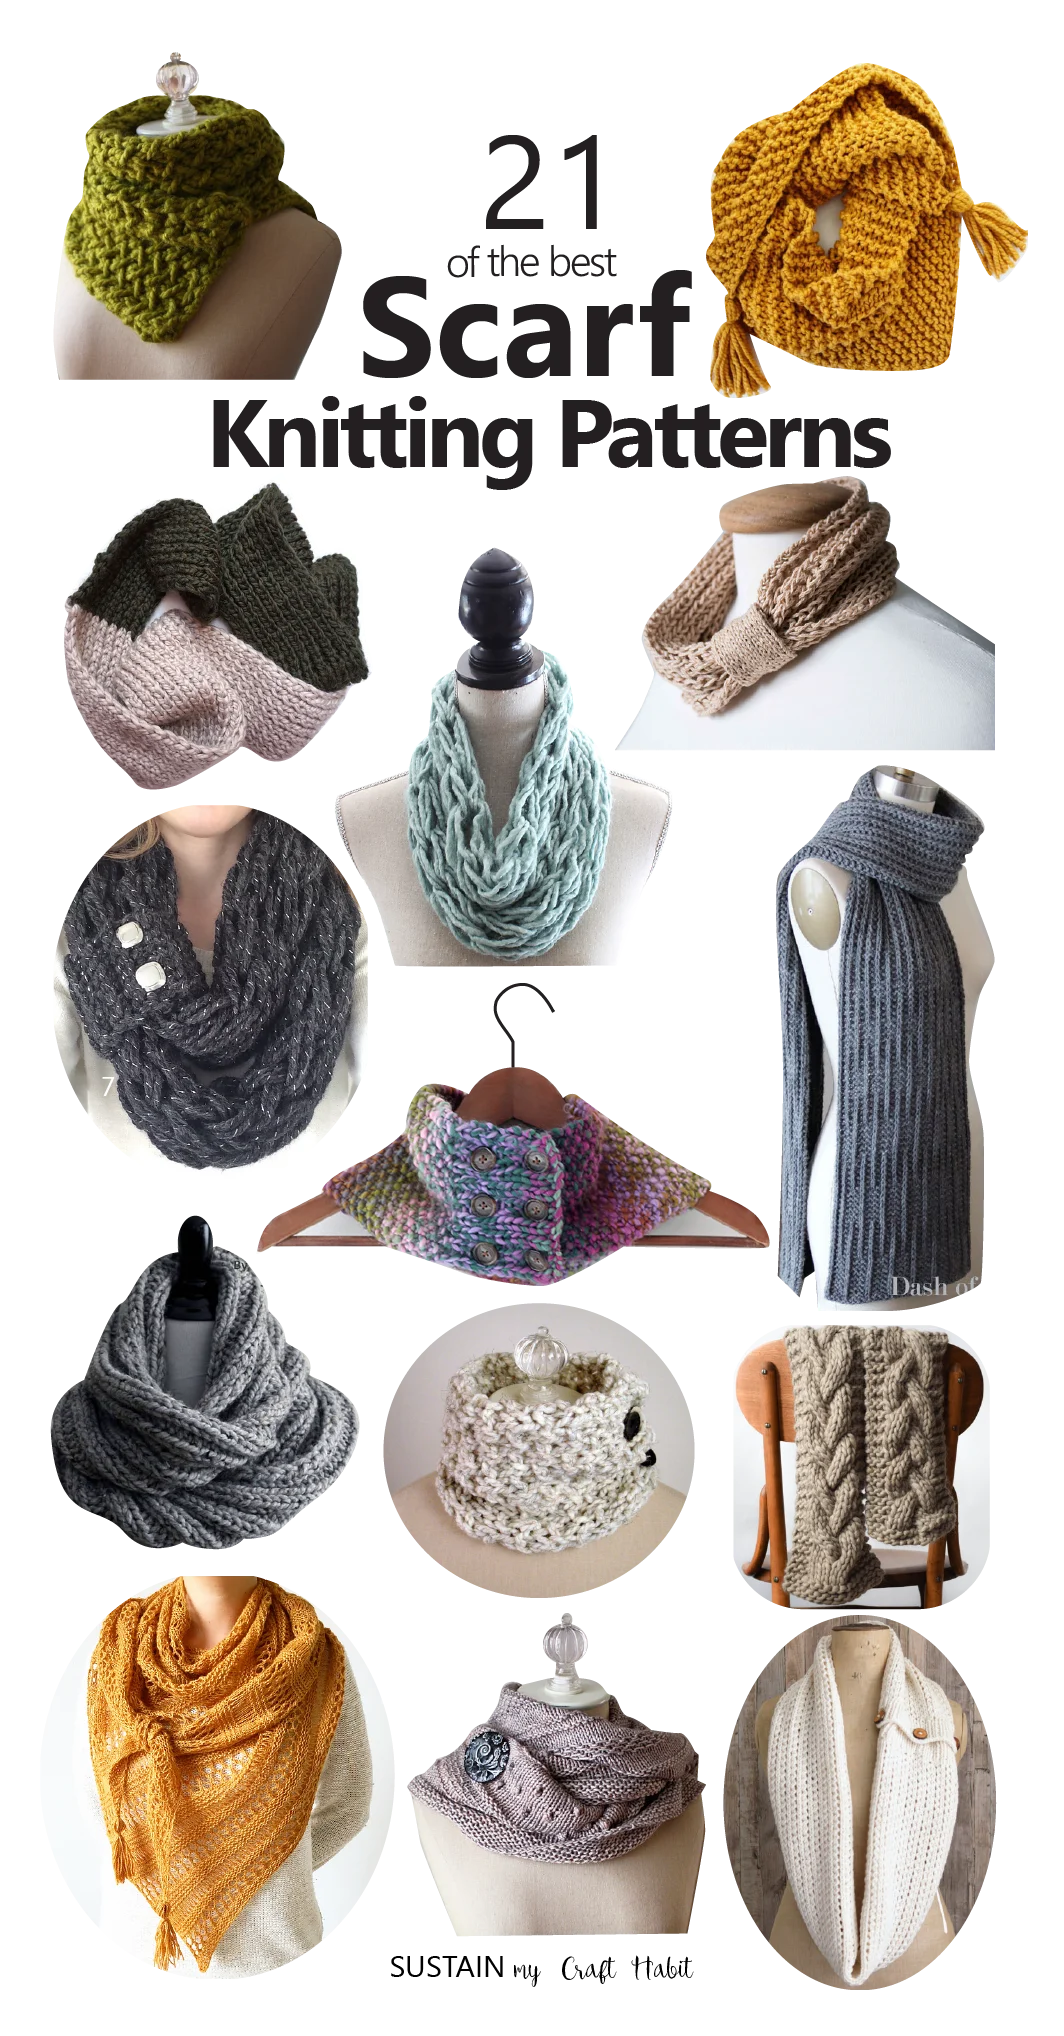 Collage of images showing 14 different scarf knitting patterns